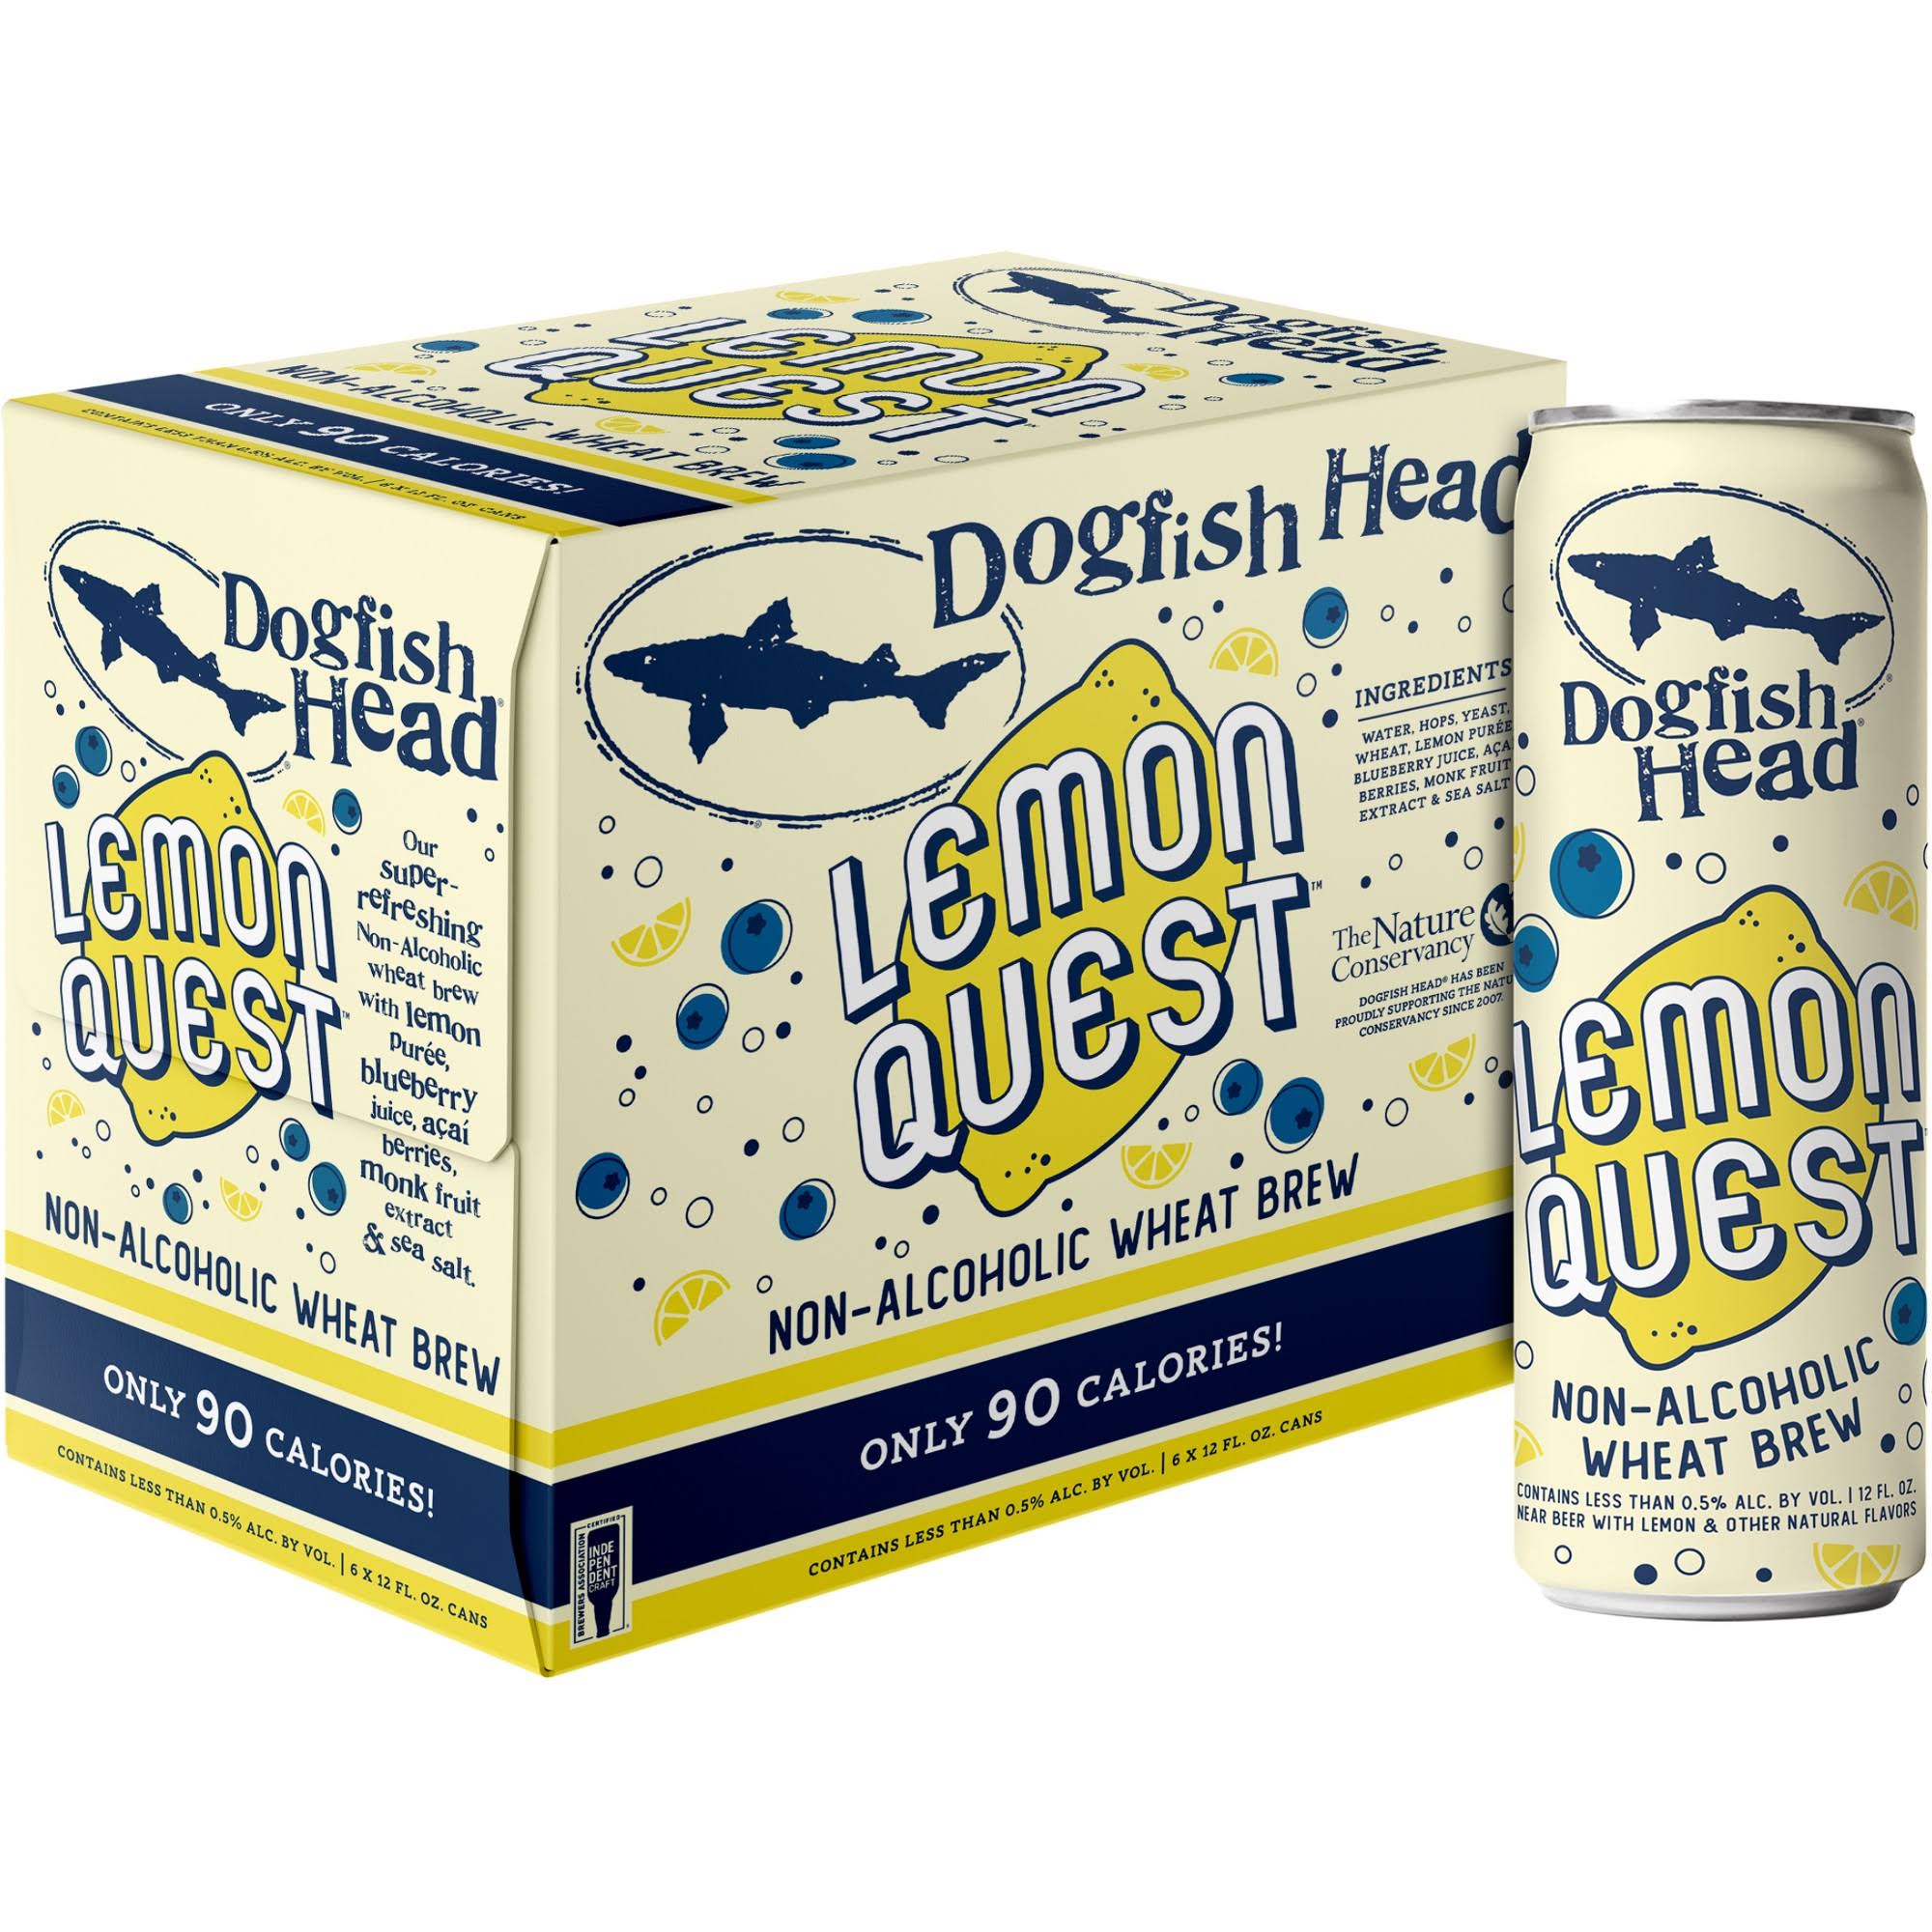 Dogfish Head Beer, Lemon Quest, 6 Pack - 6 pack, 12 fl oz cans